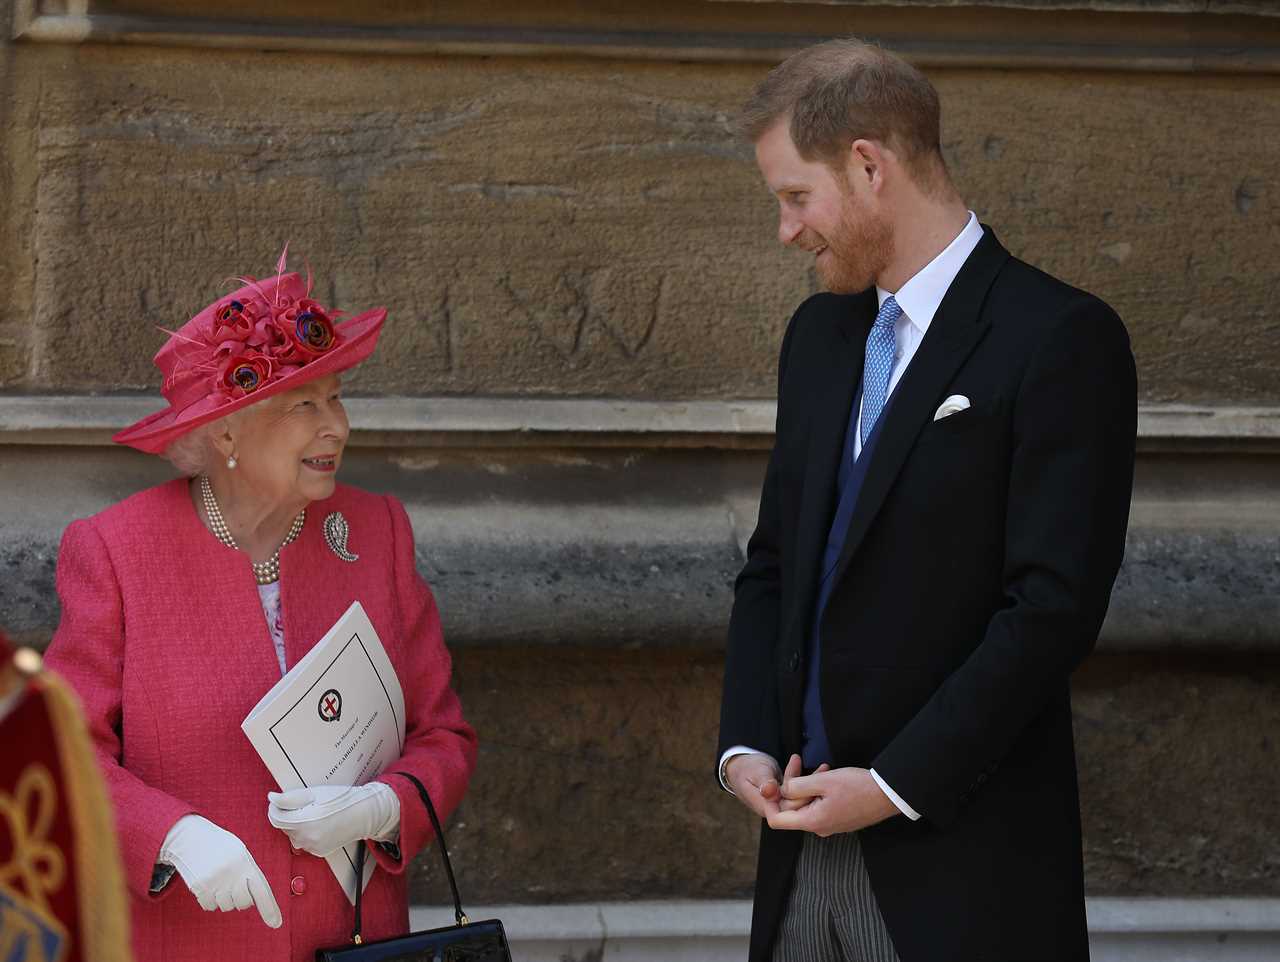 The Queen ‘adored Harry till the end’ & hoped rift between family and the Sussexes would be healed, royal expert claims